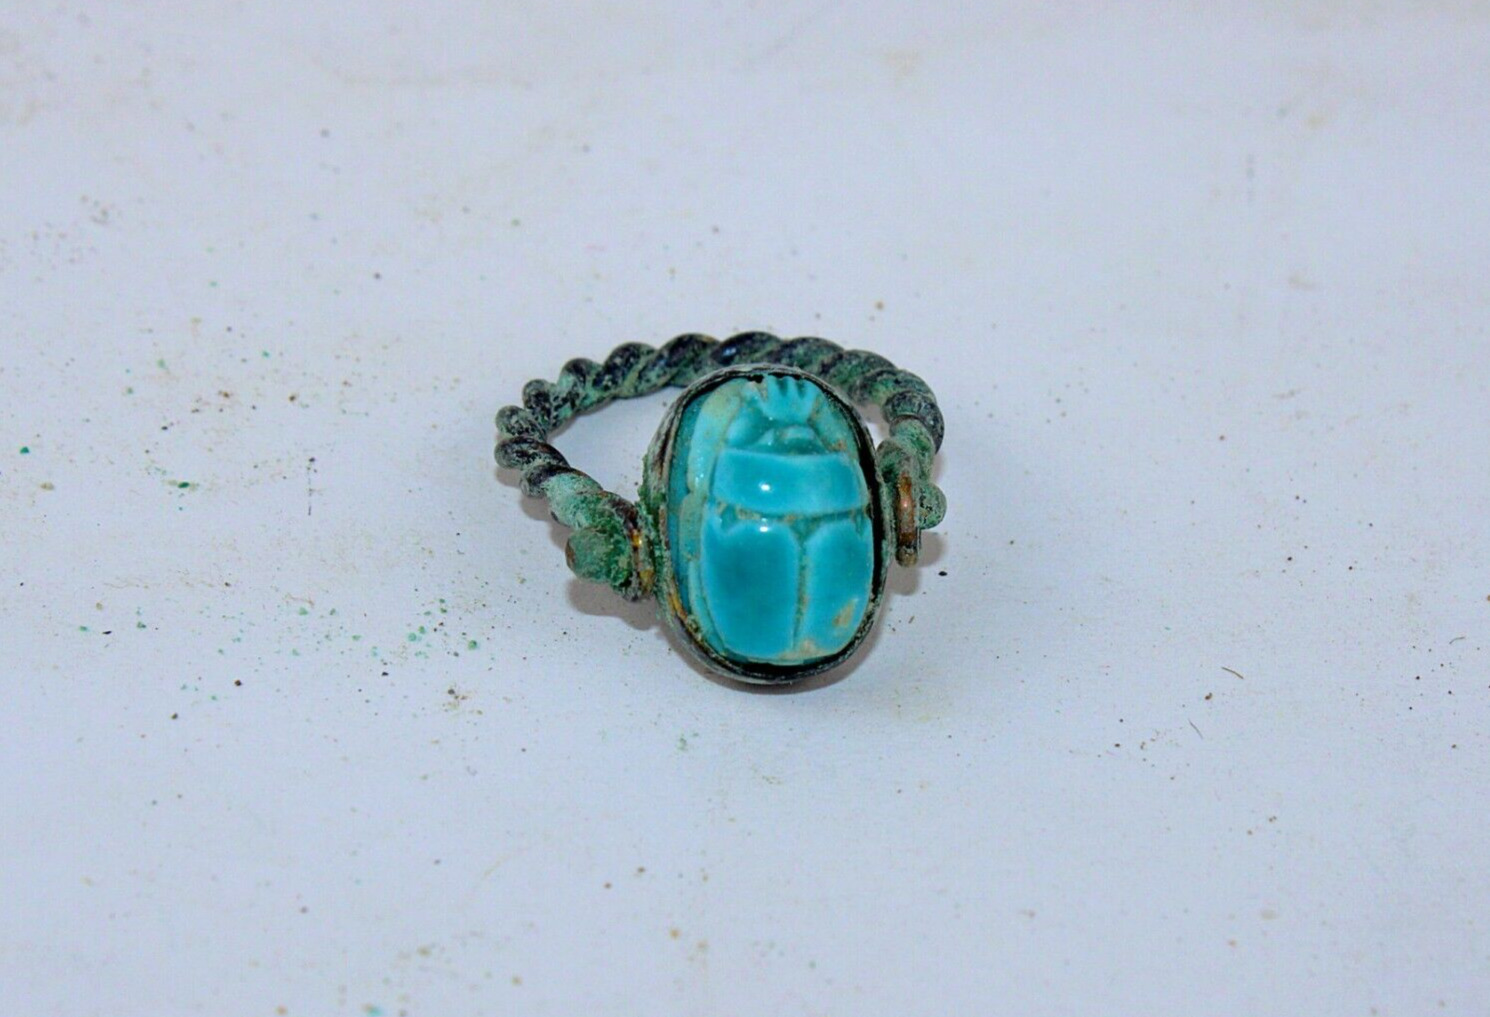 Rare Ancient Egyptian Pharaonic Copper Ring With Turquoise Stone Scarab Amulet